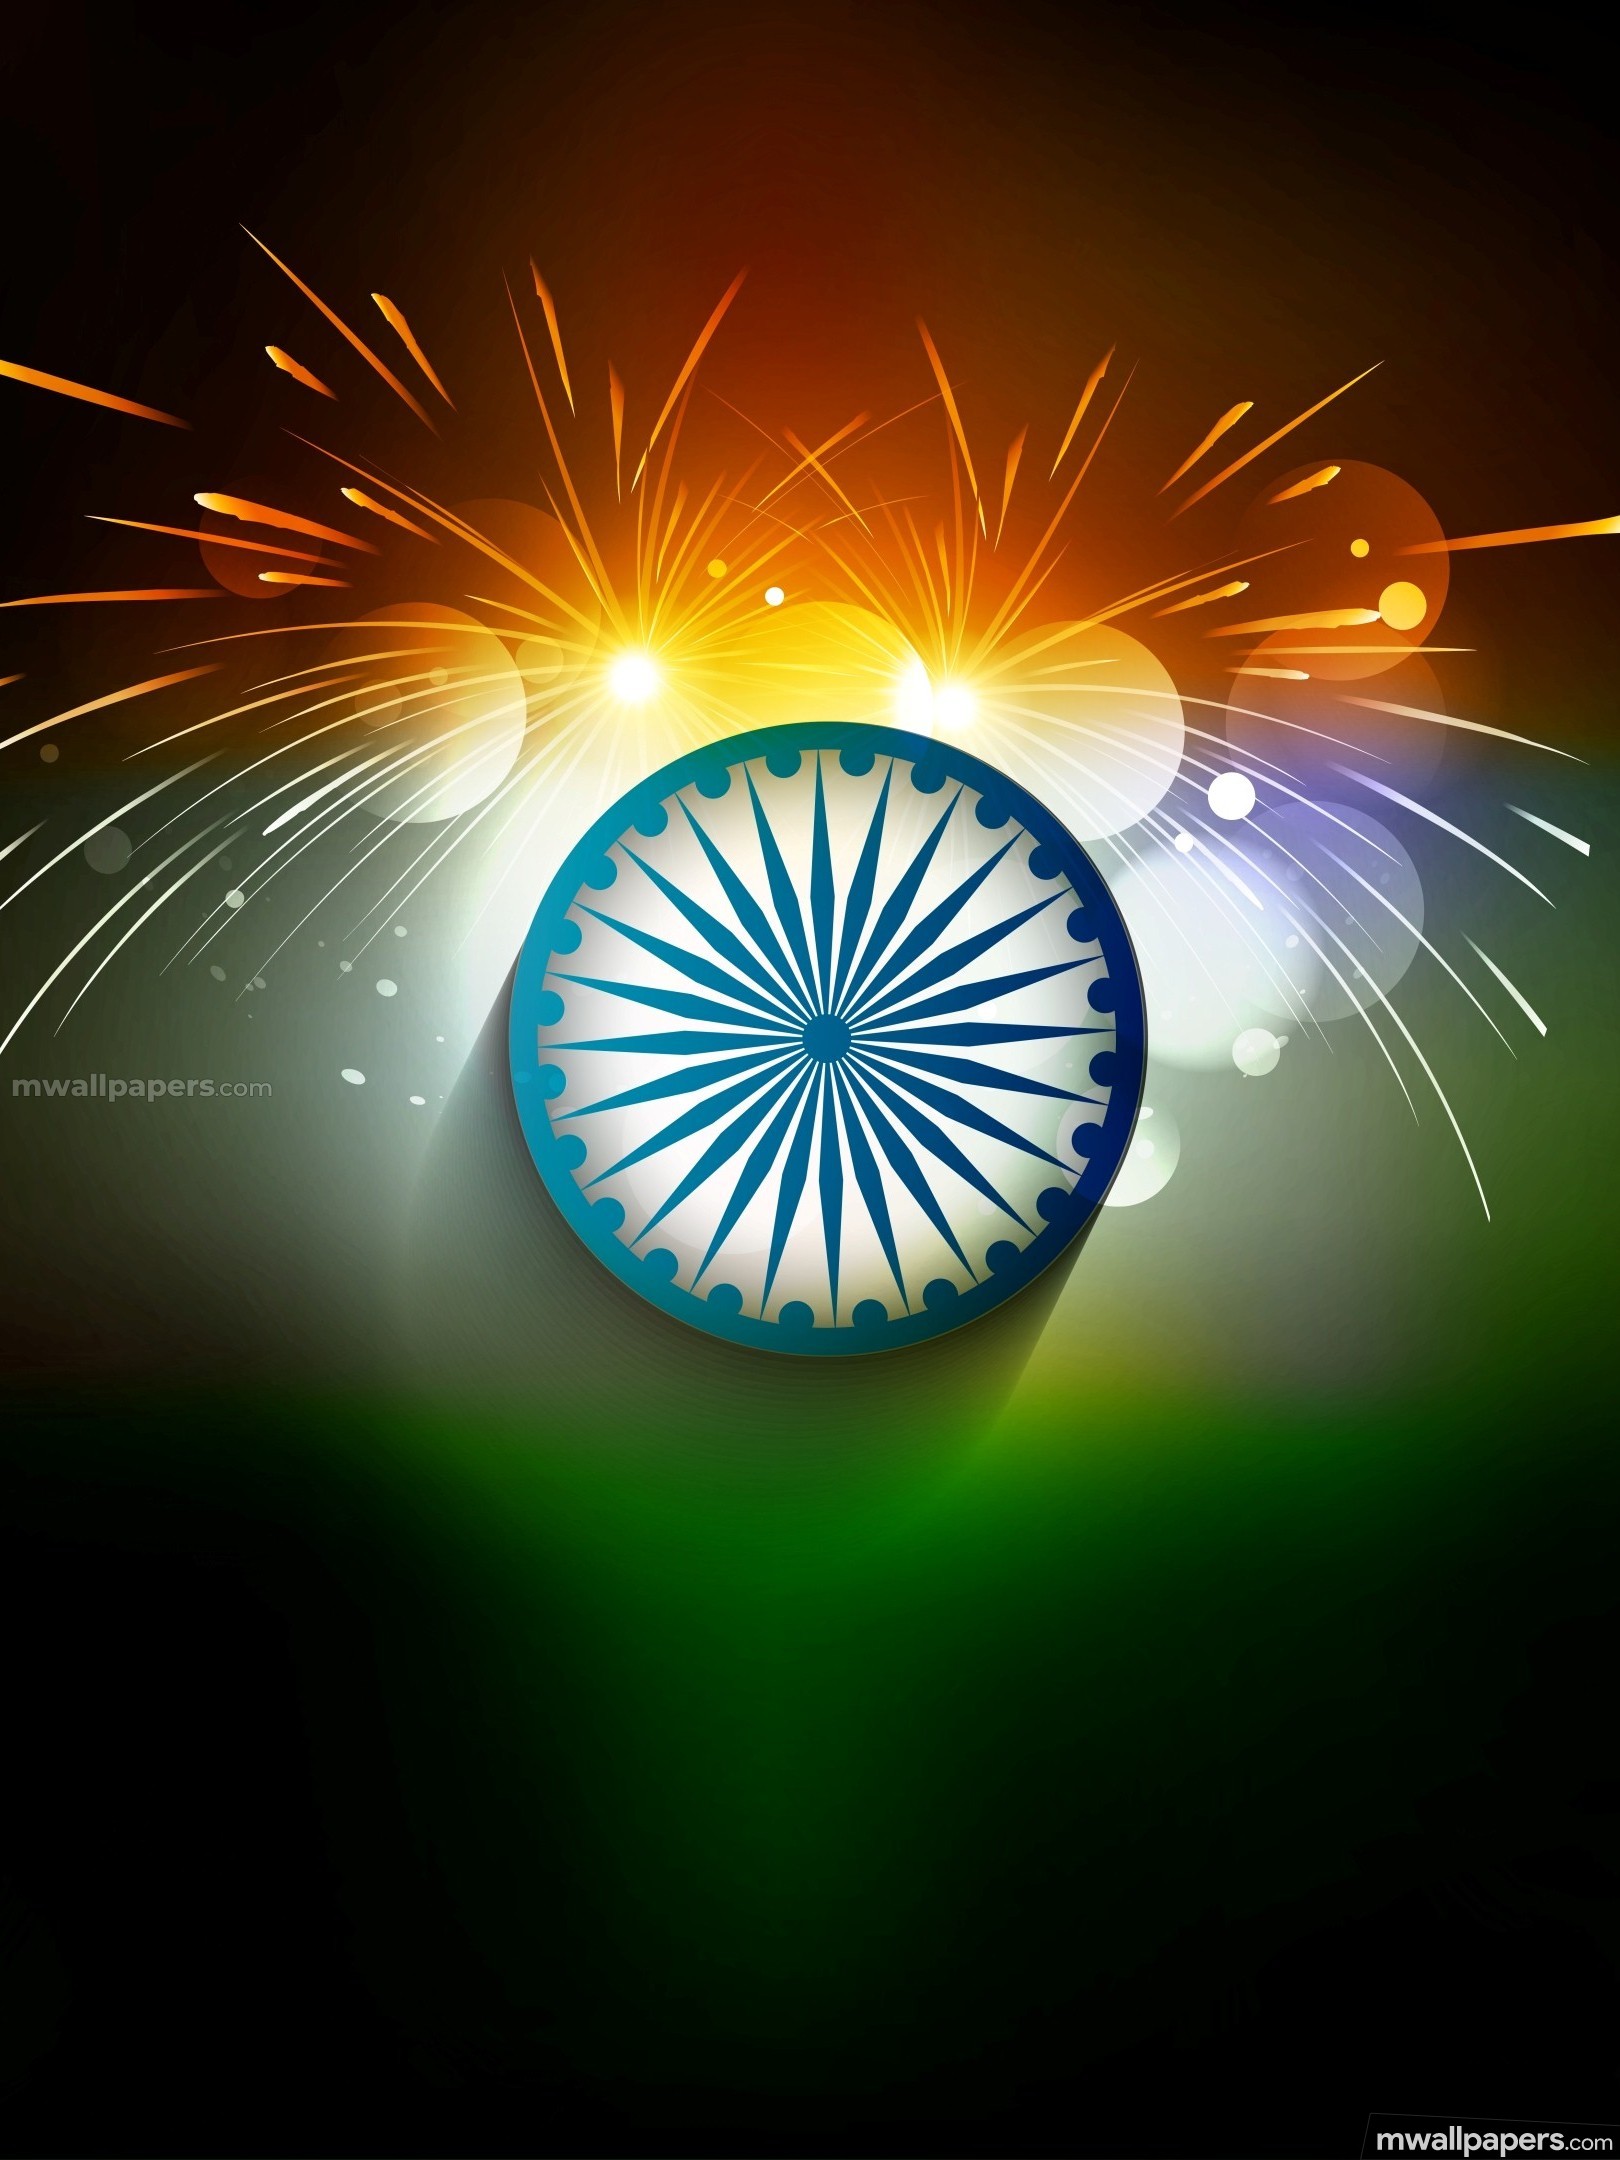 Happy Independence Day [15th August 2018] Wallpaper Photos For WhatsApp (1620x2160) (2021)